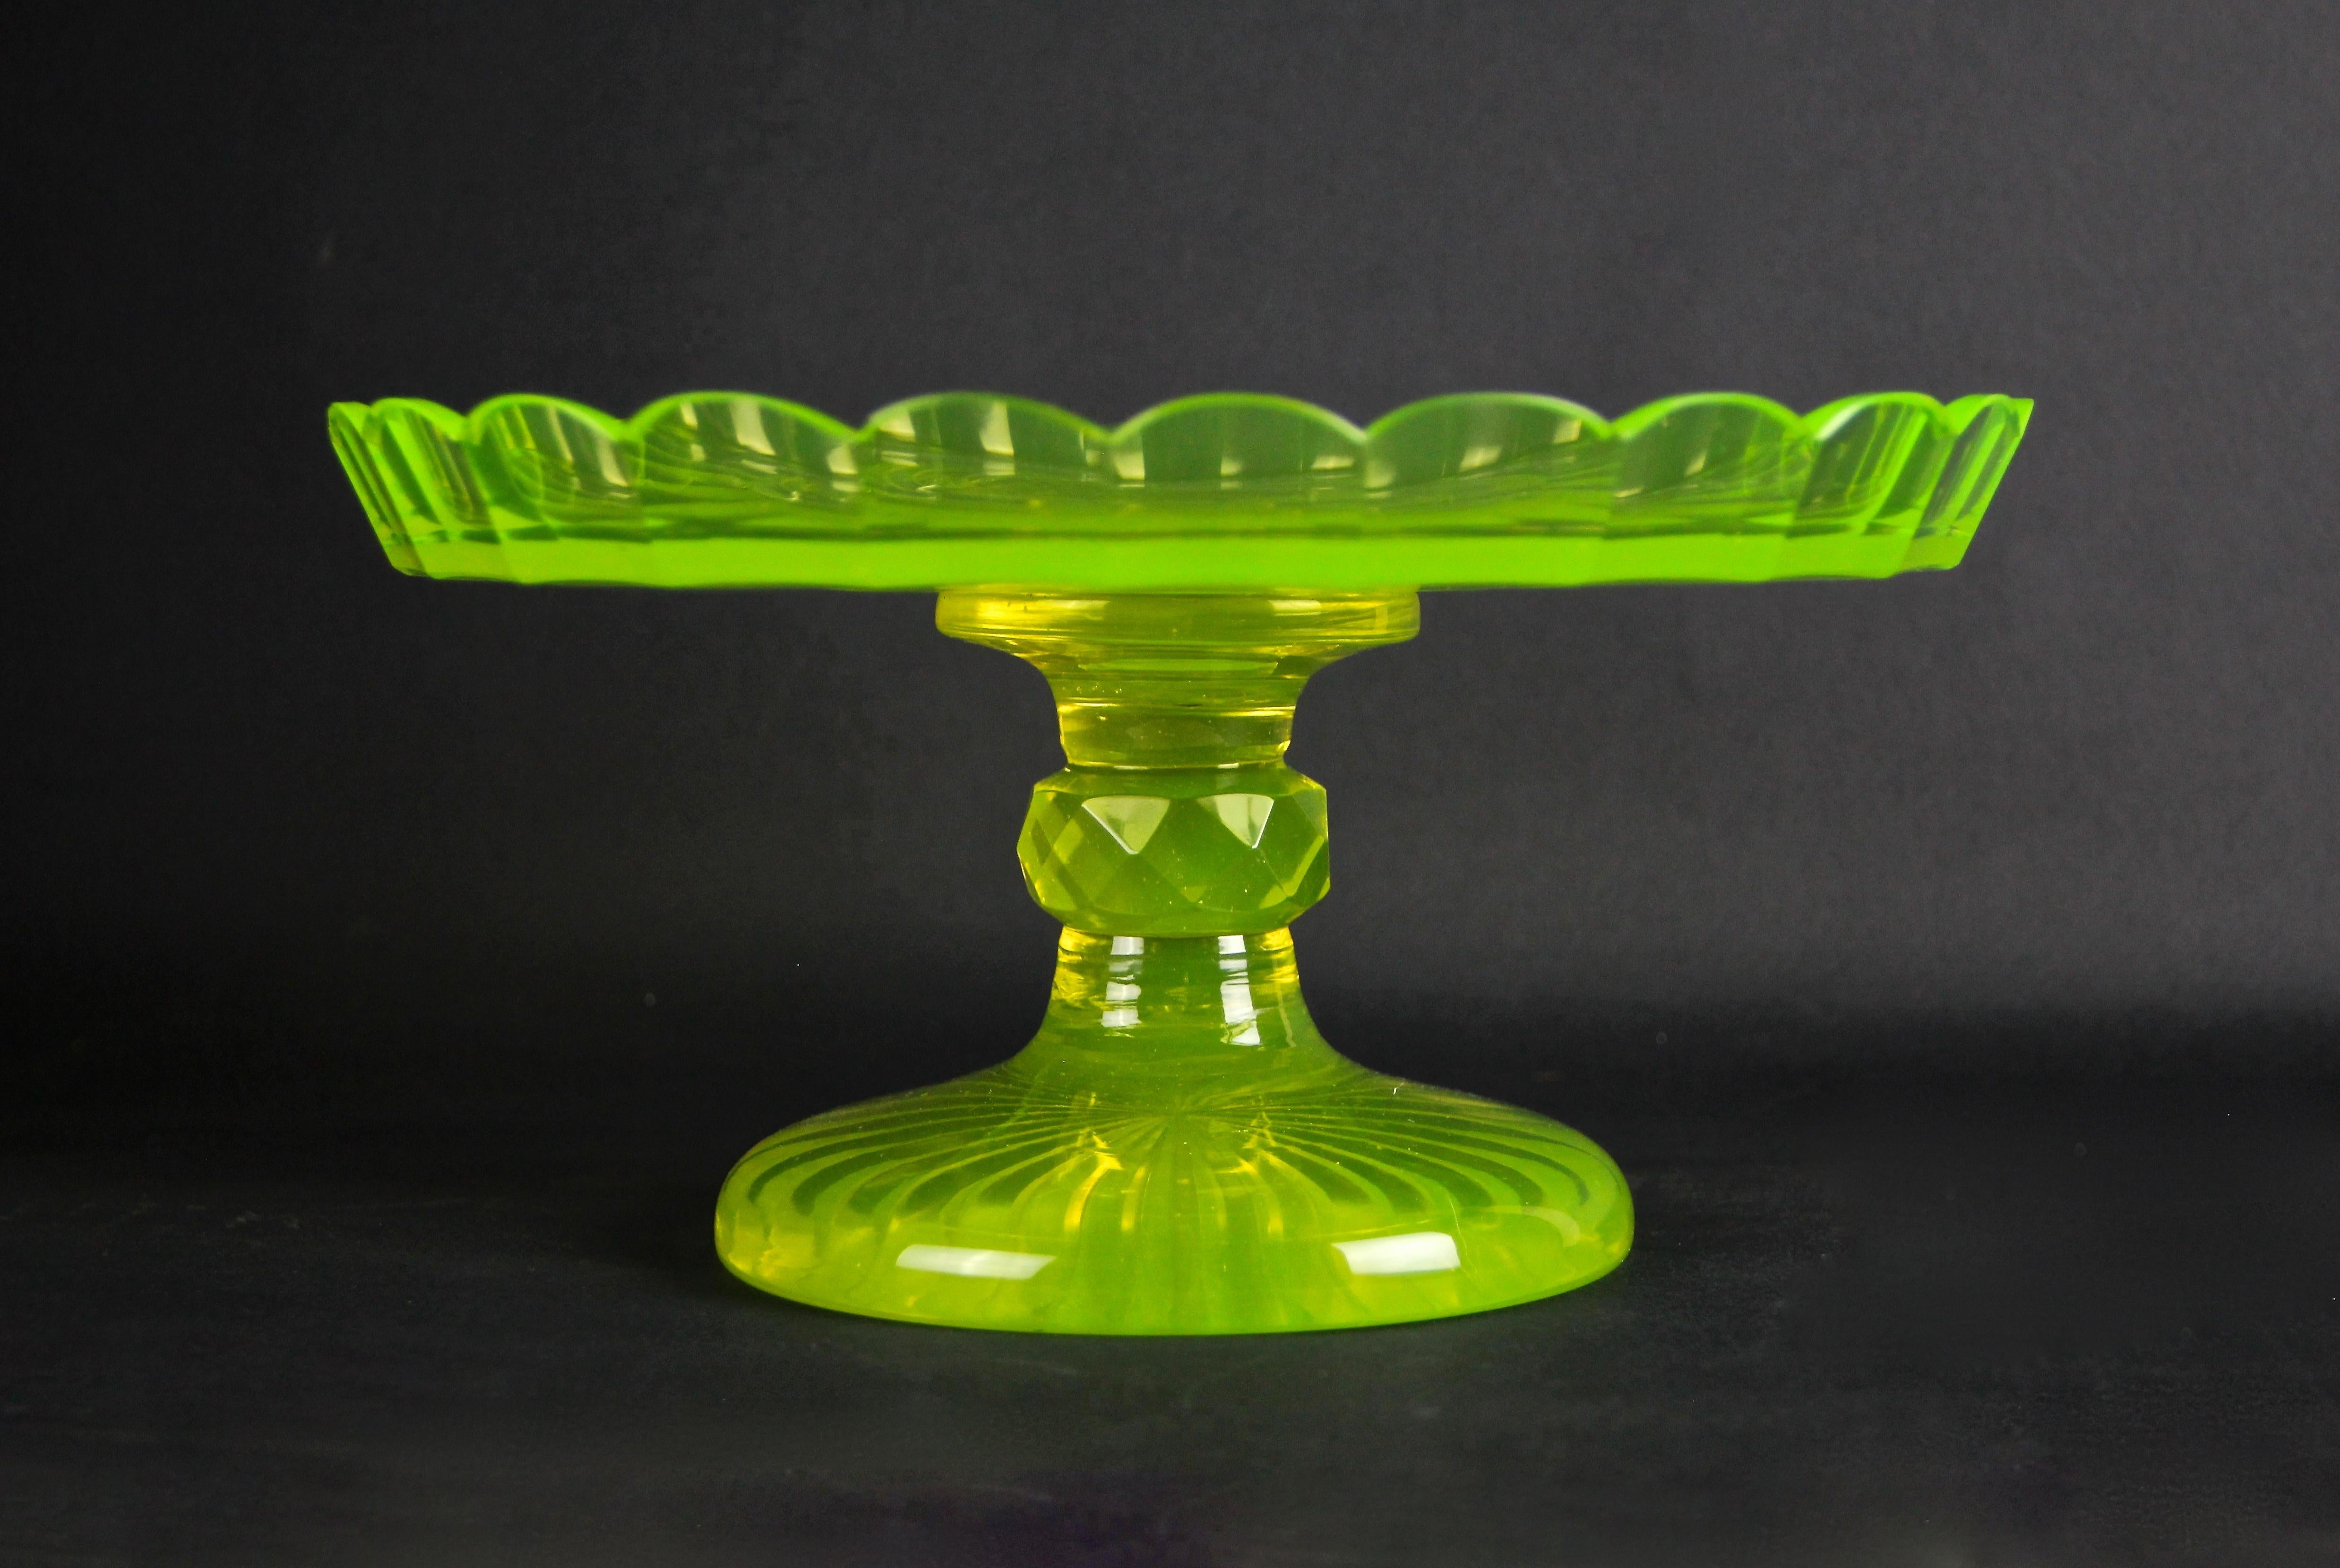 Delicate Art Deco uranium glass centerpiece from Austria, circa 1920. Colored in the typical light green tone, this very decorative glass centerpiece impresses with its lovely design. The artfully made glass bowl sits on a beautiful shaped base